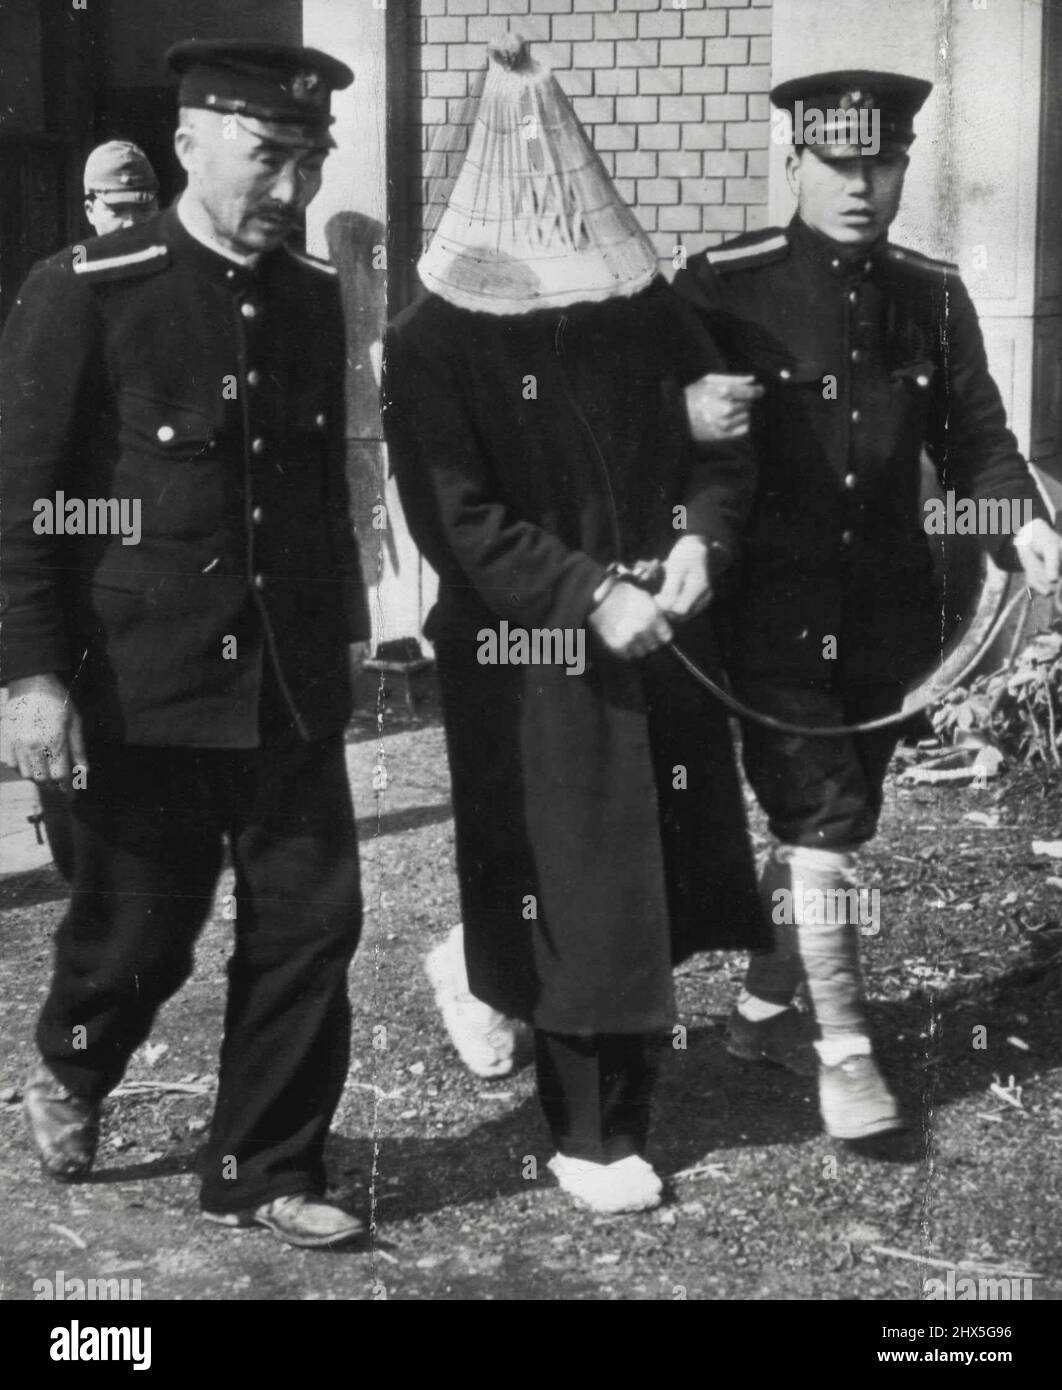 Japanese 'Bluebeard' Goes To Court - Flanked by two policemen, one of whom holds the traditional rope attached to the prisoner's handcuffed wrists, Yoshio Kodaira, 43, is taken to court in Tokyo to face charges that he was responsible for the deaths of 10 women. Under Japanese law the straw hat he wears is allowed to hide his shame. March 14, 1947. (Photo by AP Wirephoto). Stock Photo